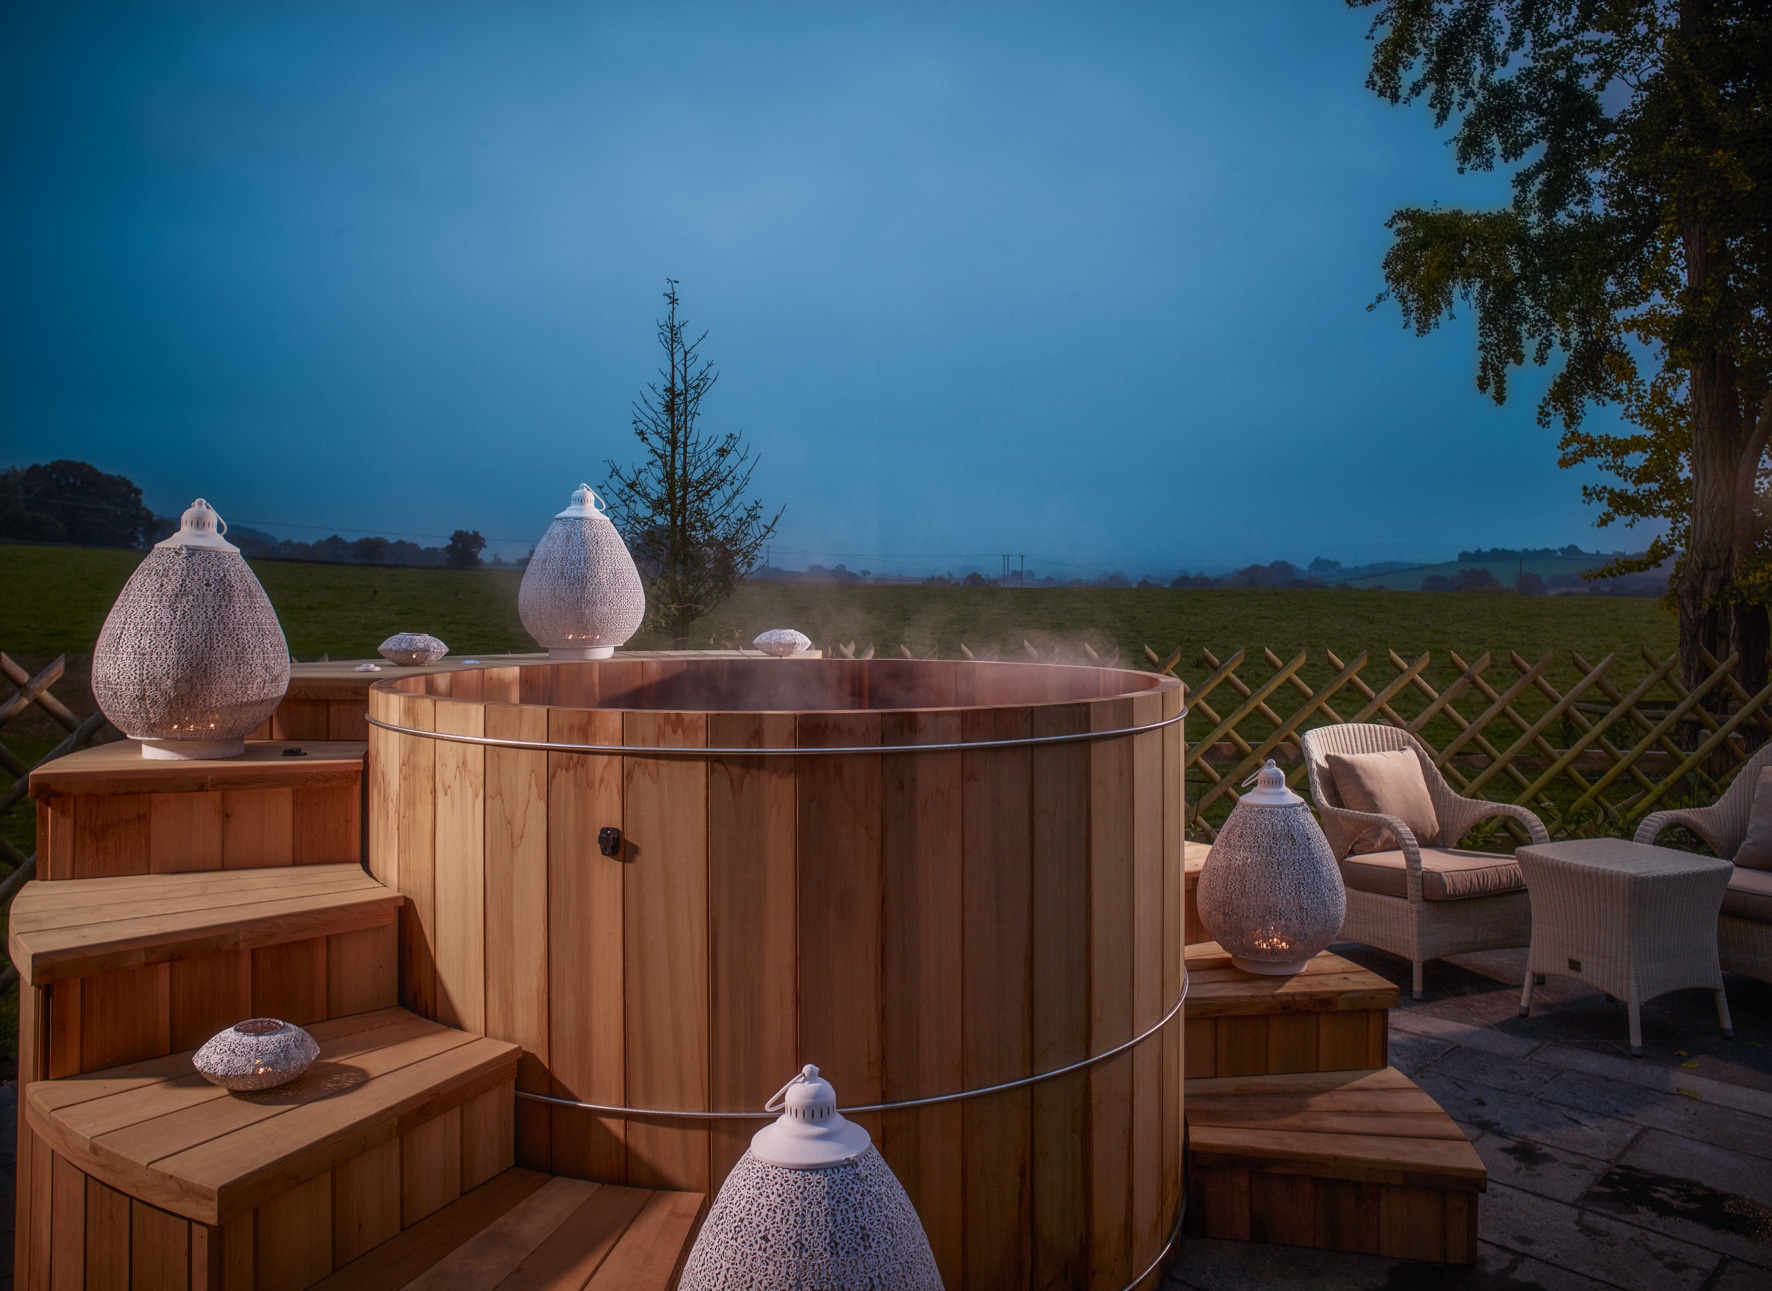 Hot-Tub-at-night-1-SPAshell-Fishmore-Hall-Copy-Copy Time To Unwind | Wellness Breaks